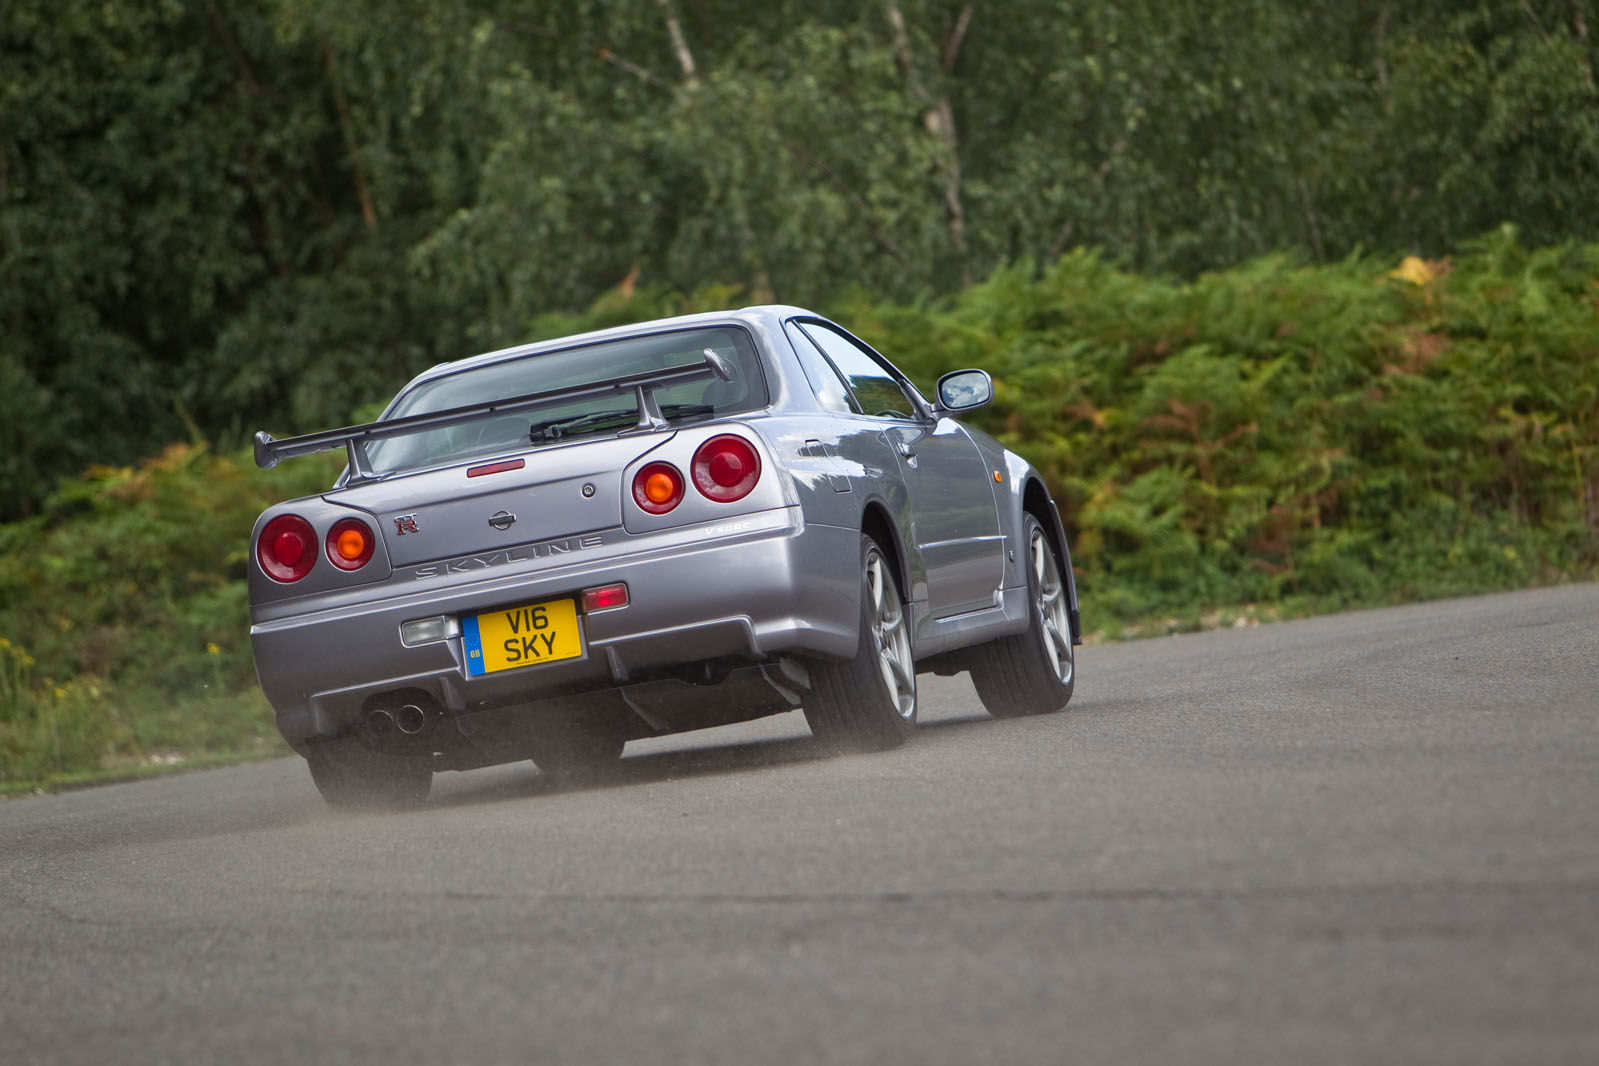 Used car buying guide: Nissan Skyline GT-R R34